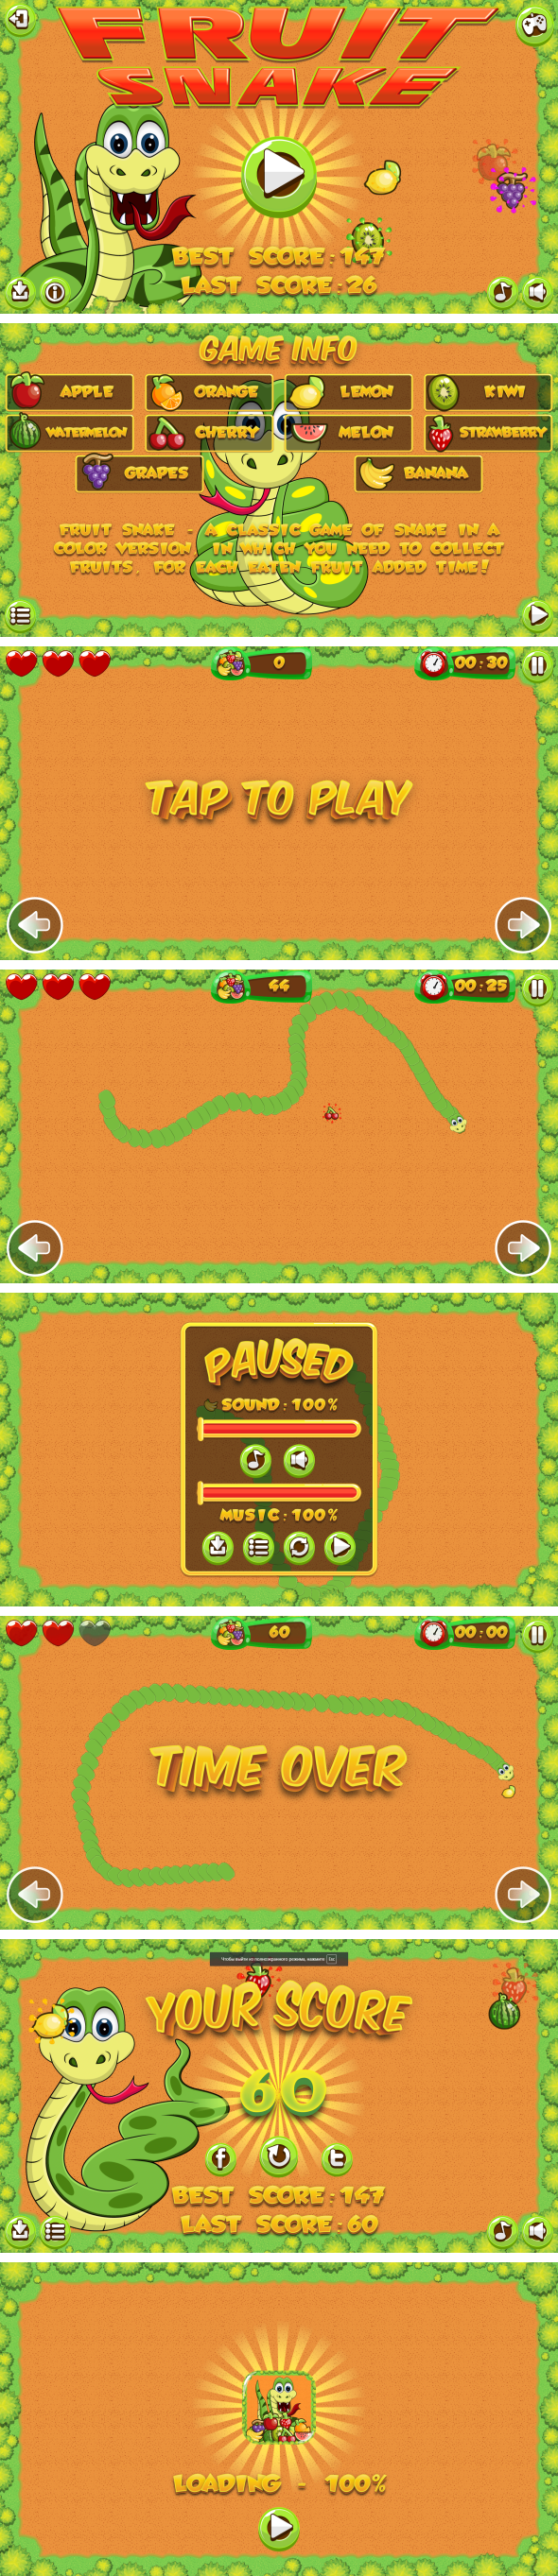 Fruit Snake - HTML5 Game, Mobile Version+AdMob!!! (Construct 3 | Construct 2 | Capx) - 1